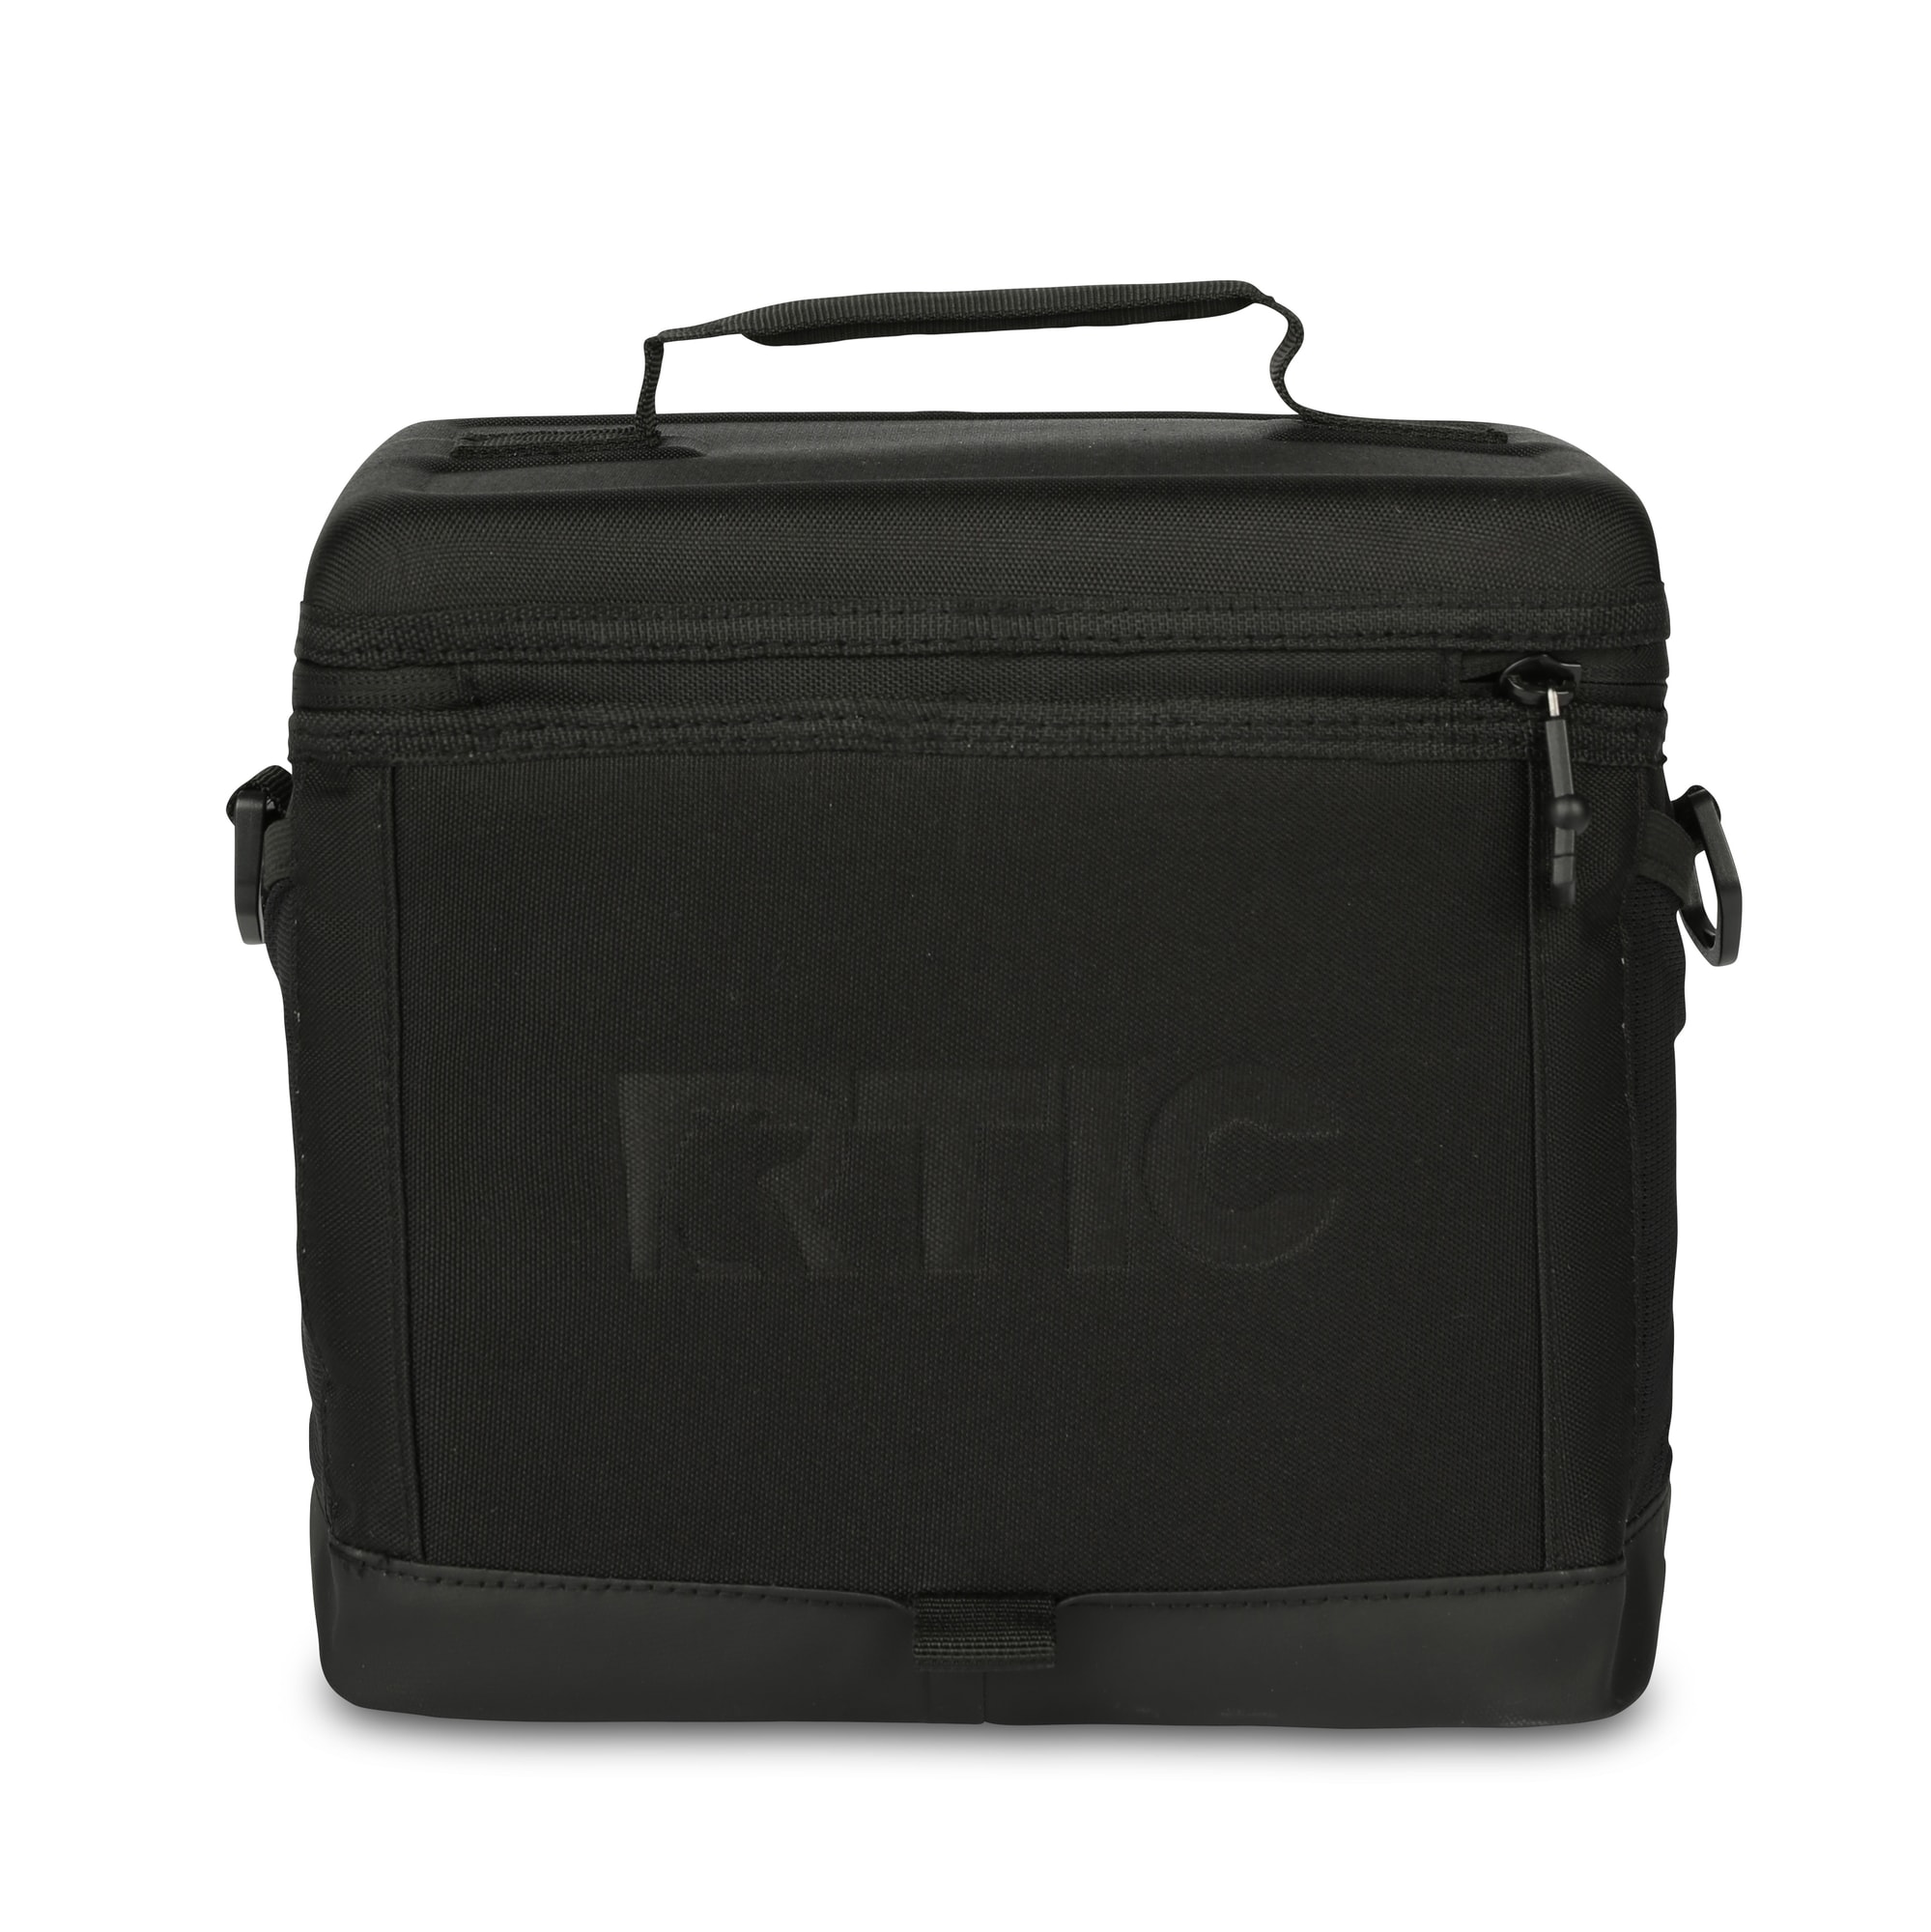 RTIC Outdoors Everyday Cooler Black 8 Cans Insulated Personal Cooler in ...